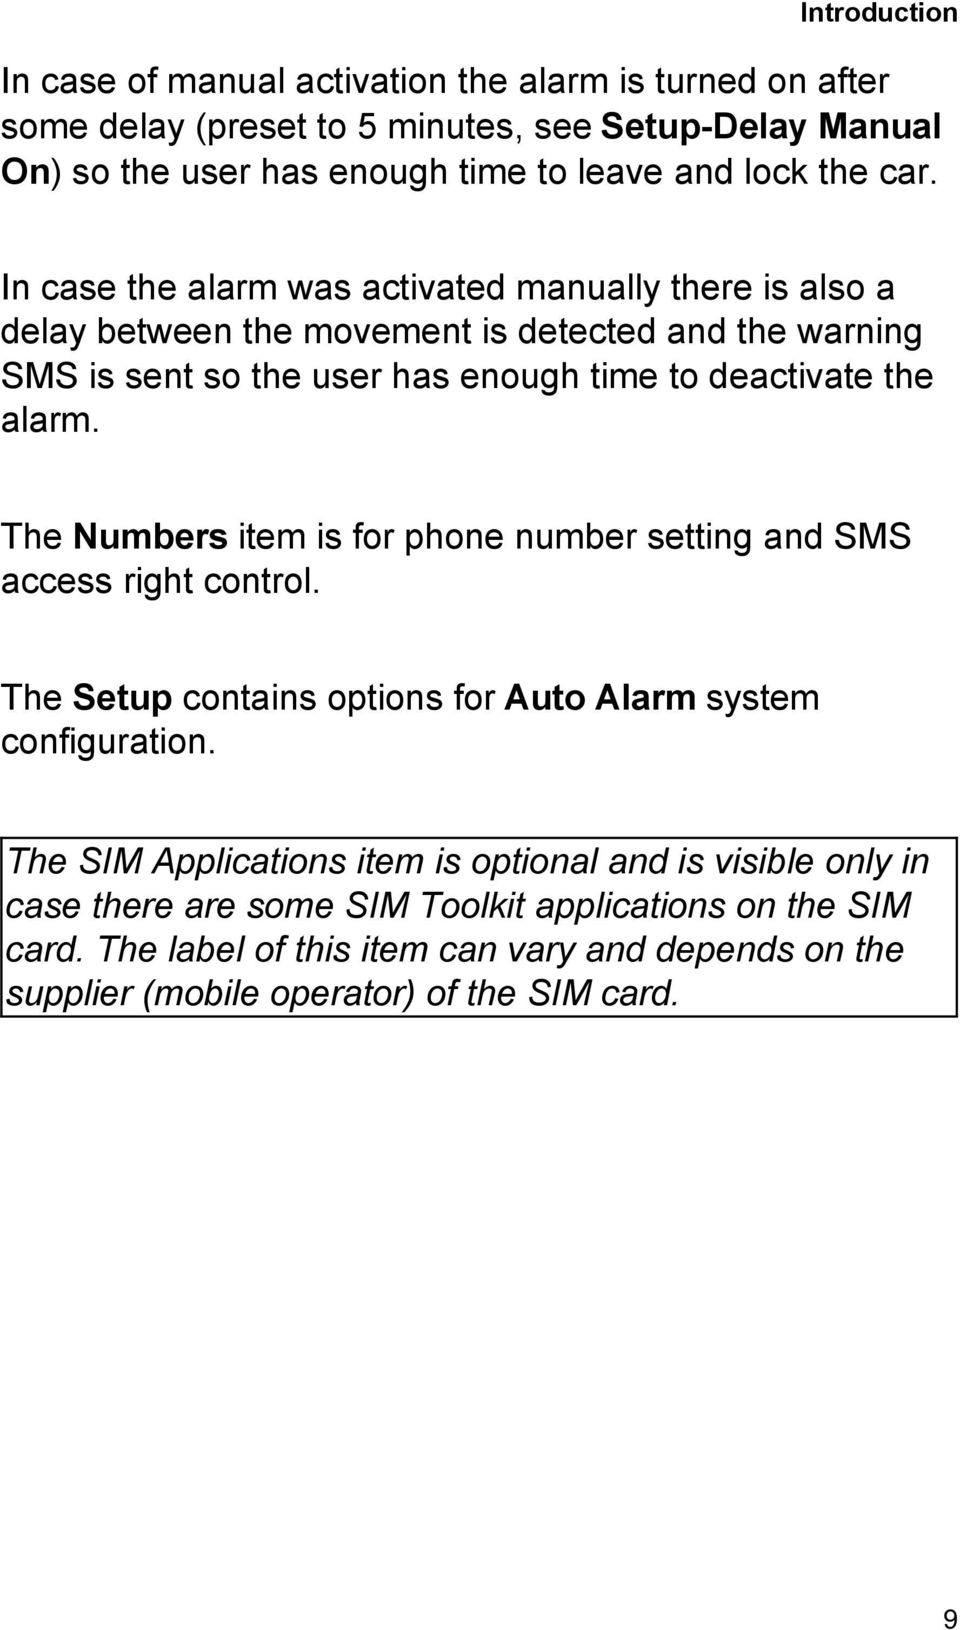 The Numbers item is for phone number setting and SMS access right control. The Setup contains options for Auto Alarm system configuration.